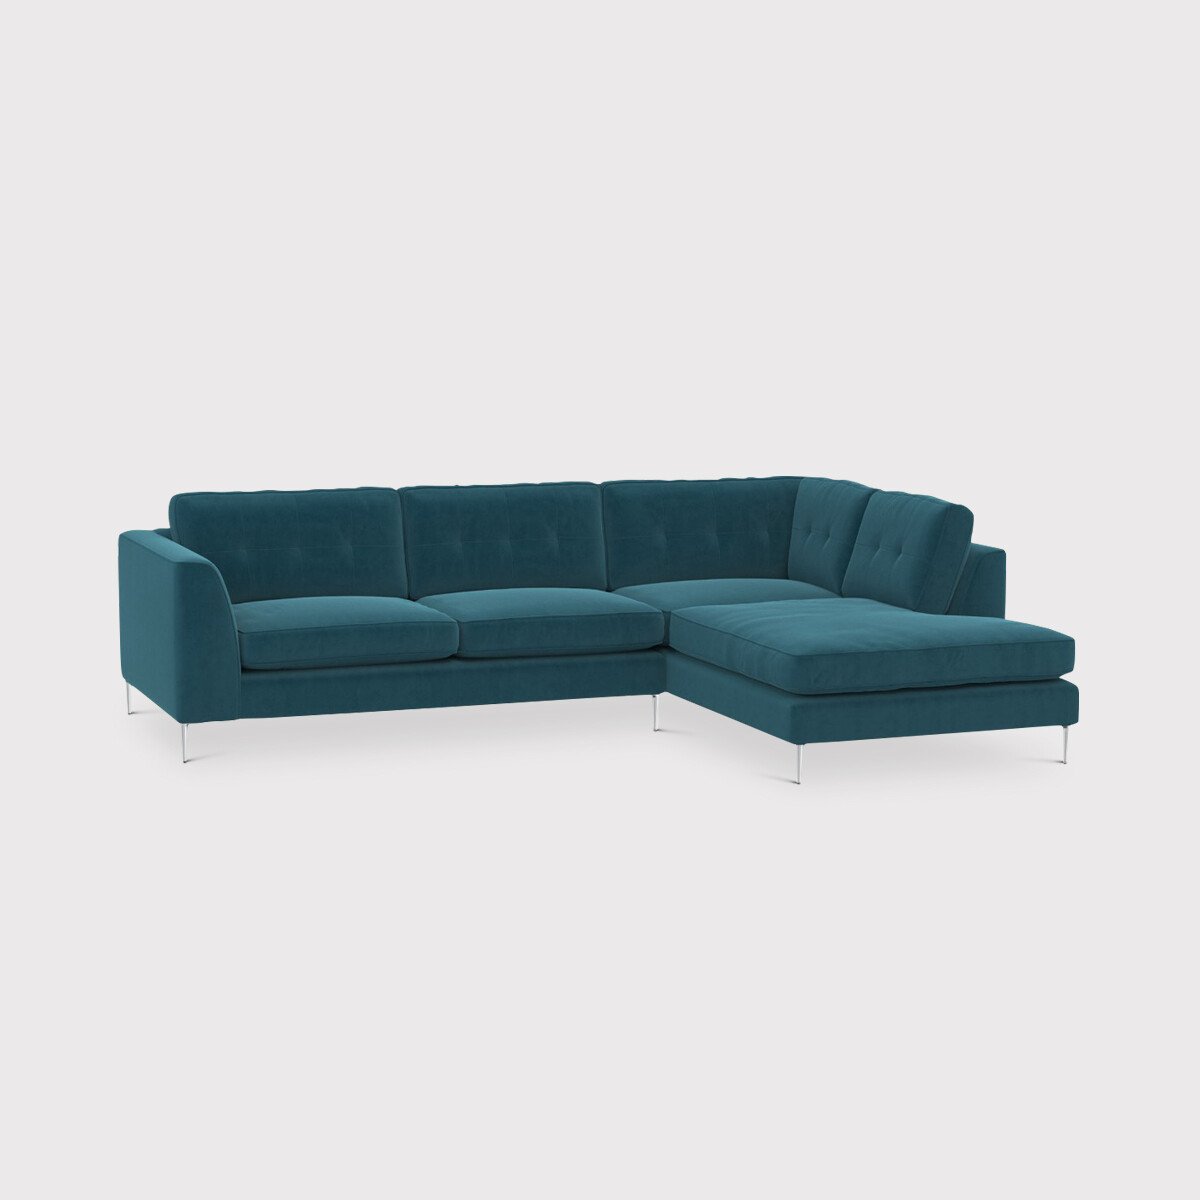 Conza Large Corner Group Left, Teal Fabric | Barker & Stonehouse